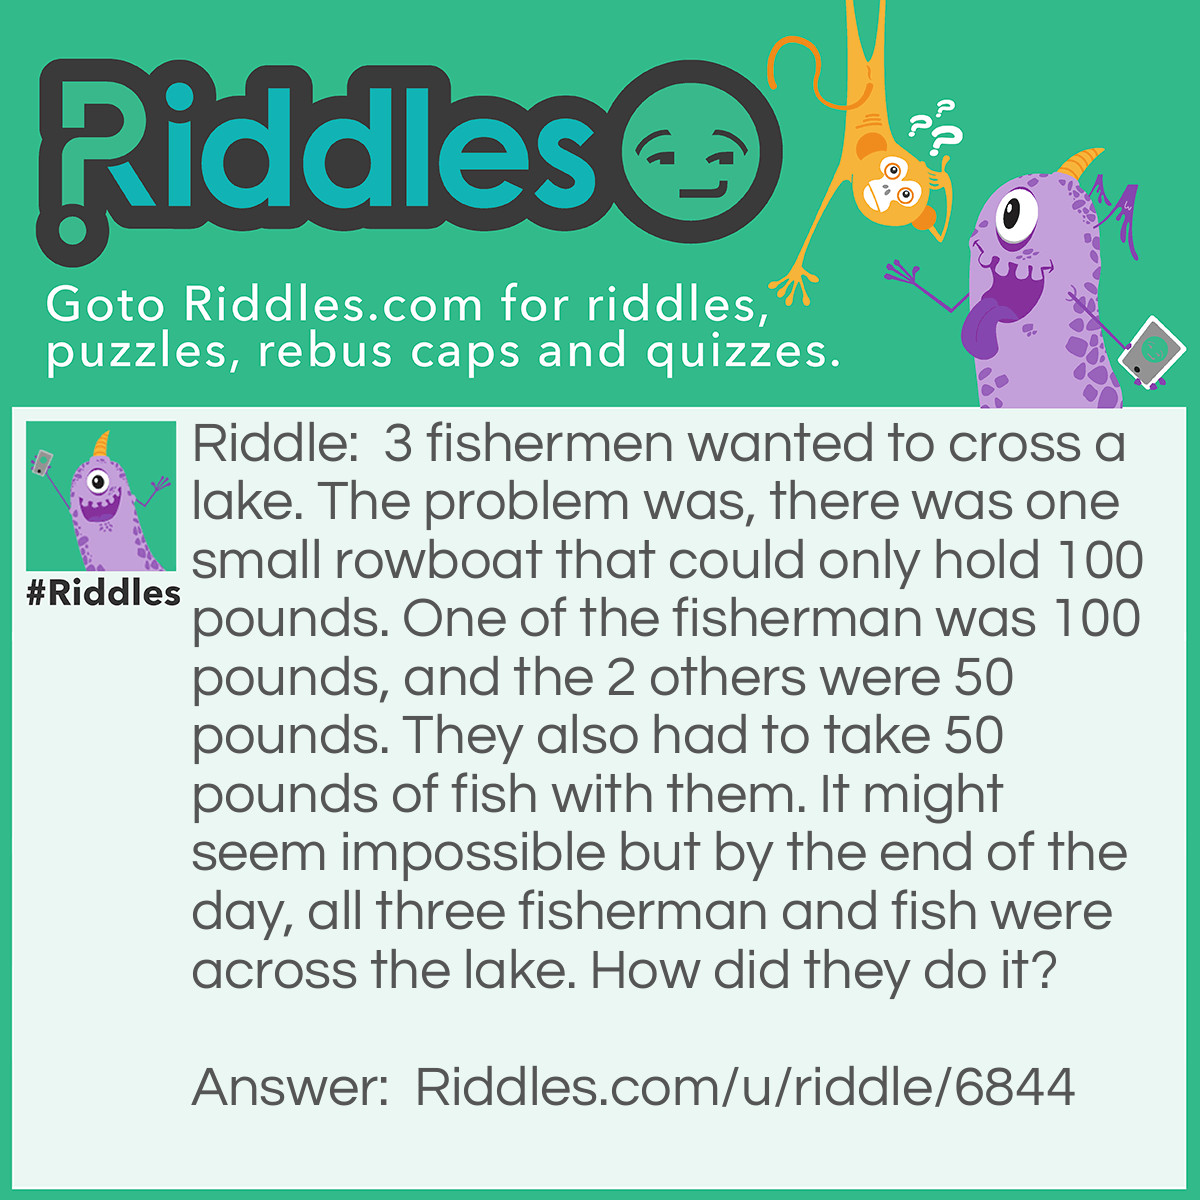 Riddle: 3 fishermen wanted to cross a lake. The problem was, there was one small rowboat that could only hold 100 pounds. One of the fisherman was 100 pounds, and the 2 others were 50 pounds. They also had to take 50 pounds of fish with them. It might seem impossible but by the end of the day, all three fisherman and fish were across the lake. How did they do it? Answer: One of the 50 pound fisherman crossed with the fish, then came back to grab the other 50 pound fisherman. They crossed together, leaving the 100 pound man alone on the other side. One of the 2 fifty pound men came back to the 100 pound man and stayed there. The 100 pound man crossed the lake. Finally, the fifty pound man that is now next to the 100 pound man crosses to get the last fisherman and crosses one last time to the other side of the lake.